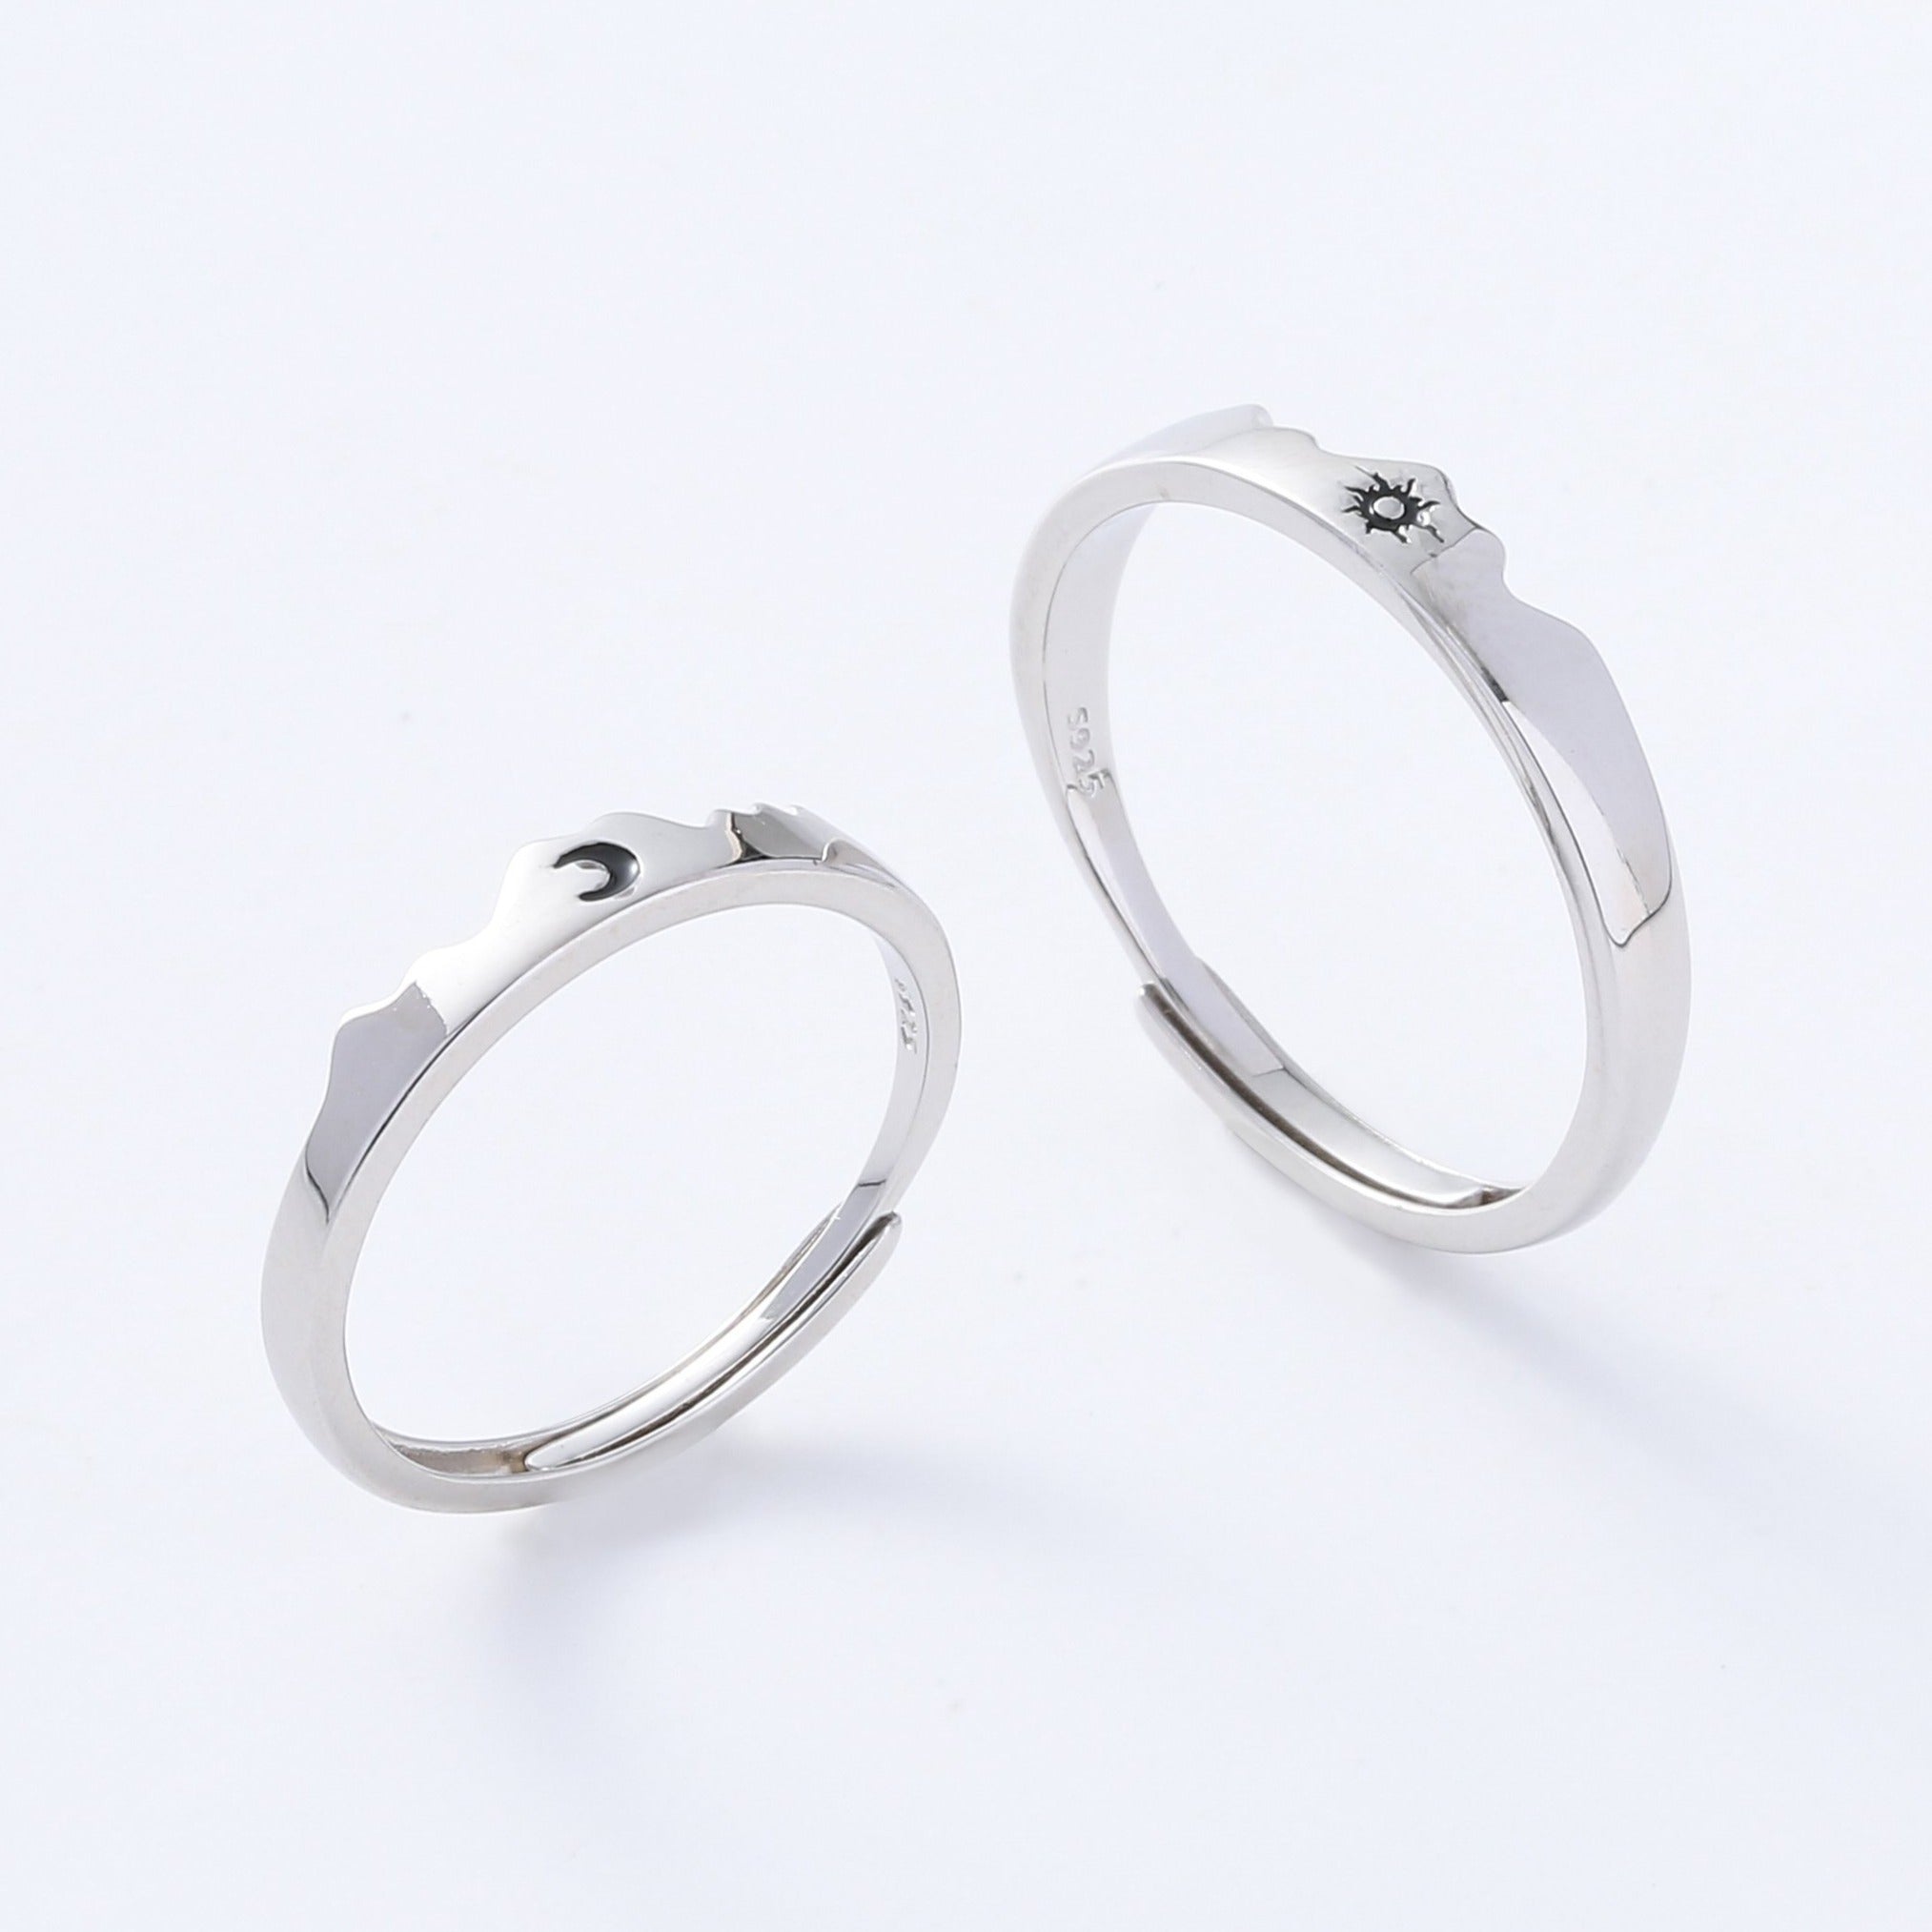 Lily & Co. - Modern couple ring designs. Send us a... | Facebook